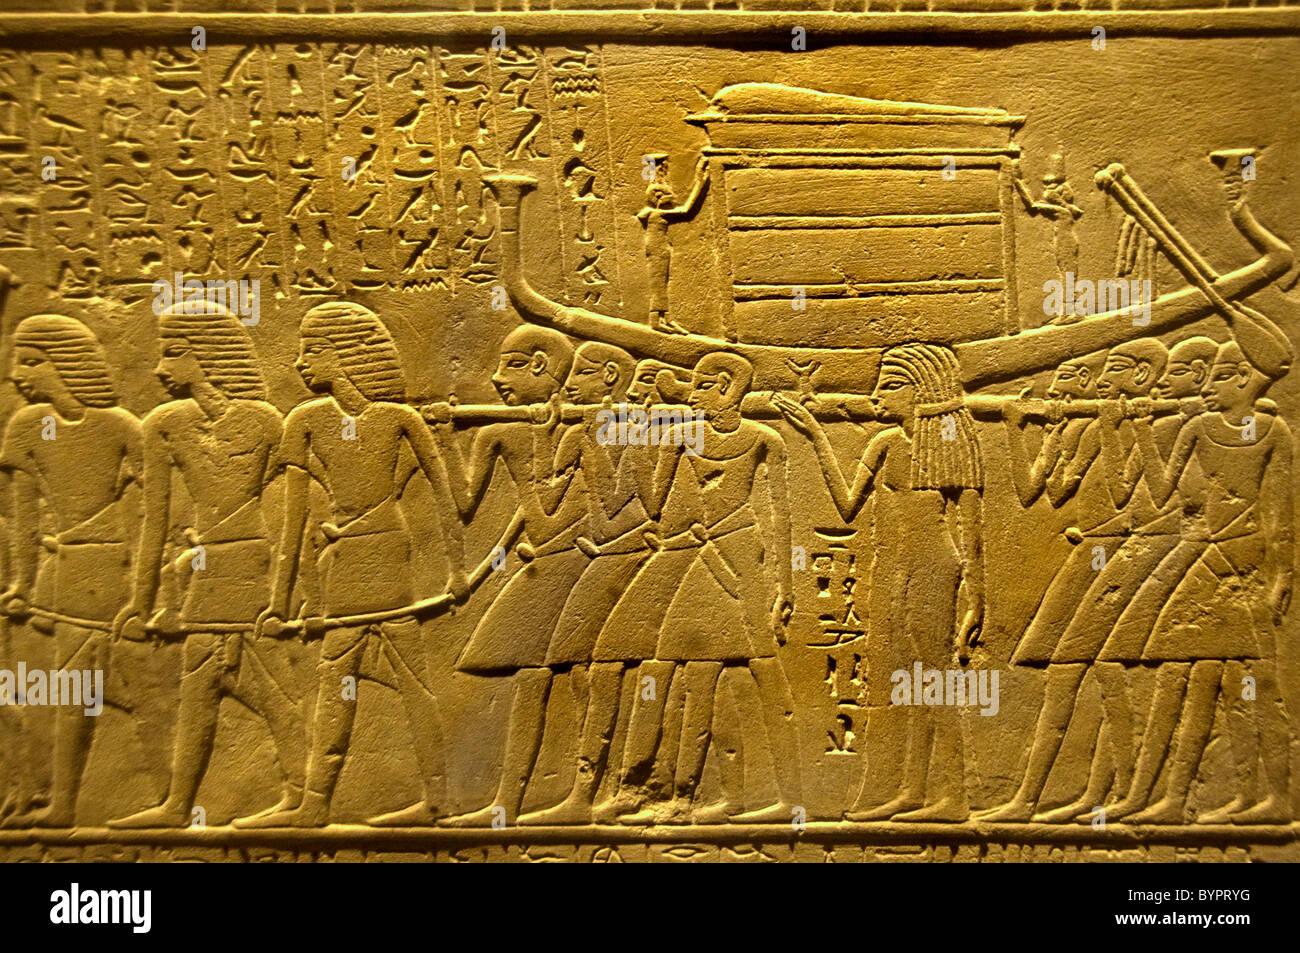 Wall Relief of Sakkara egypt Merymery 1391 - 1353 BC various phases of the funeral ritual and mouth opening Stock Photo